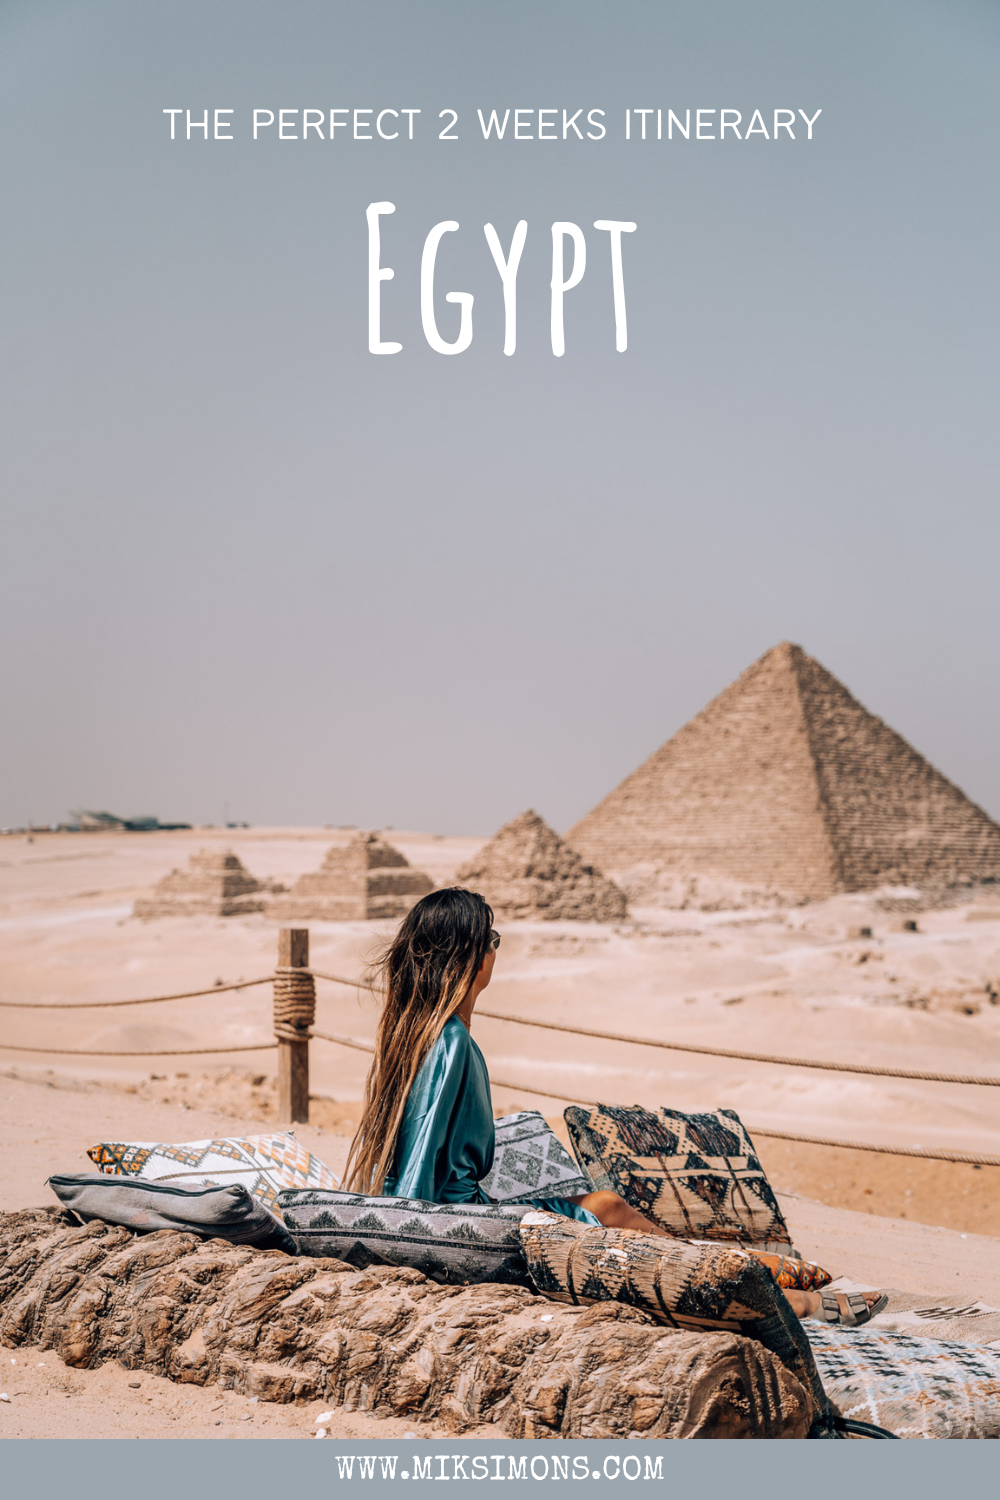 The perfect 2 weeks in Egypt itinerary